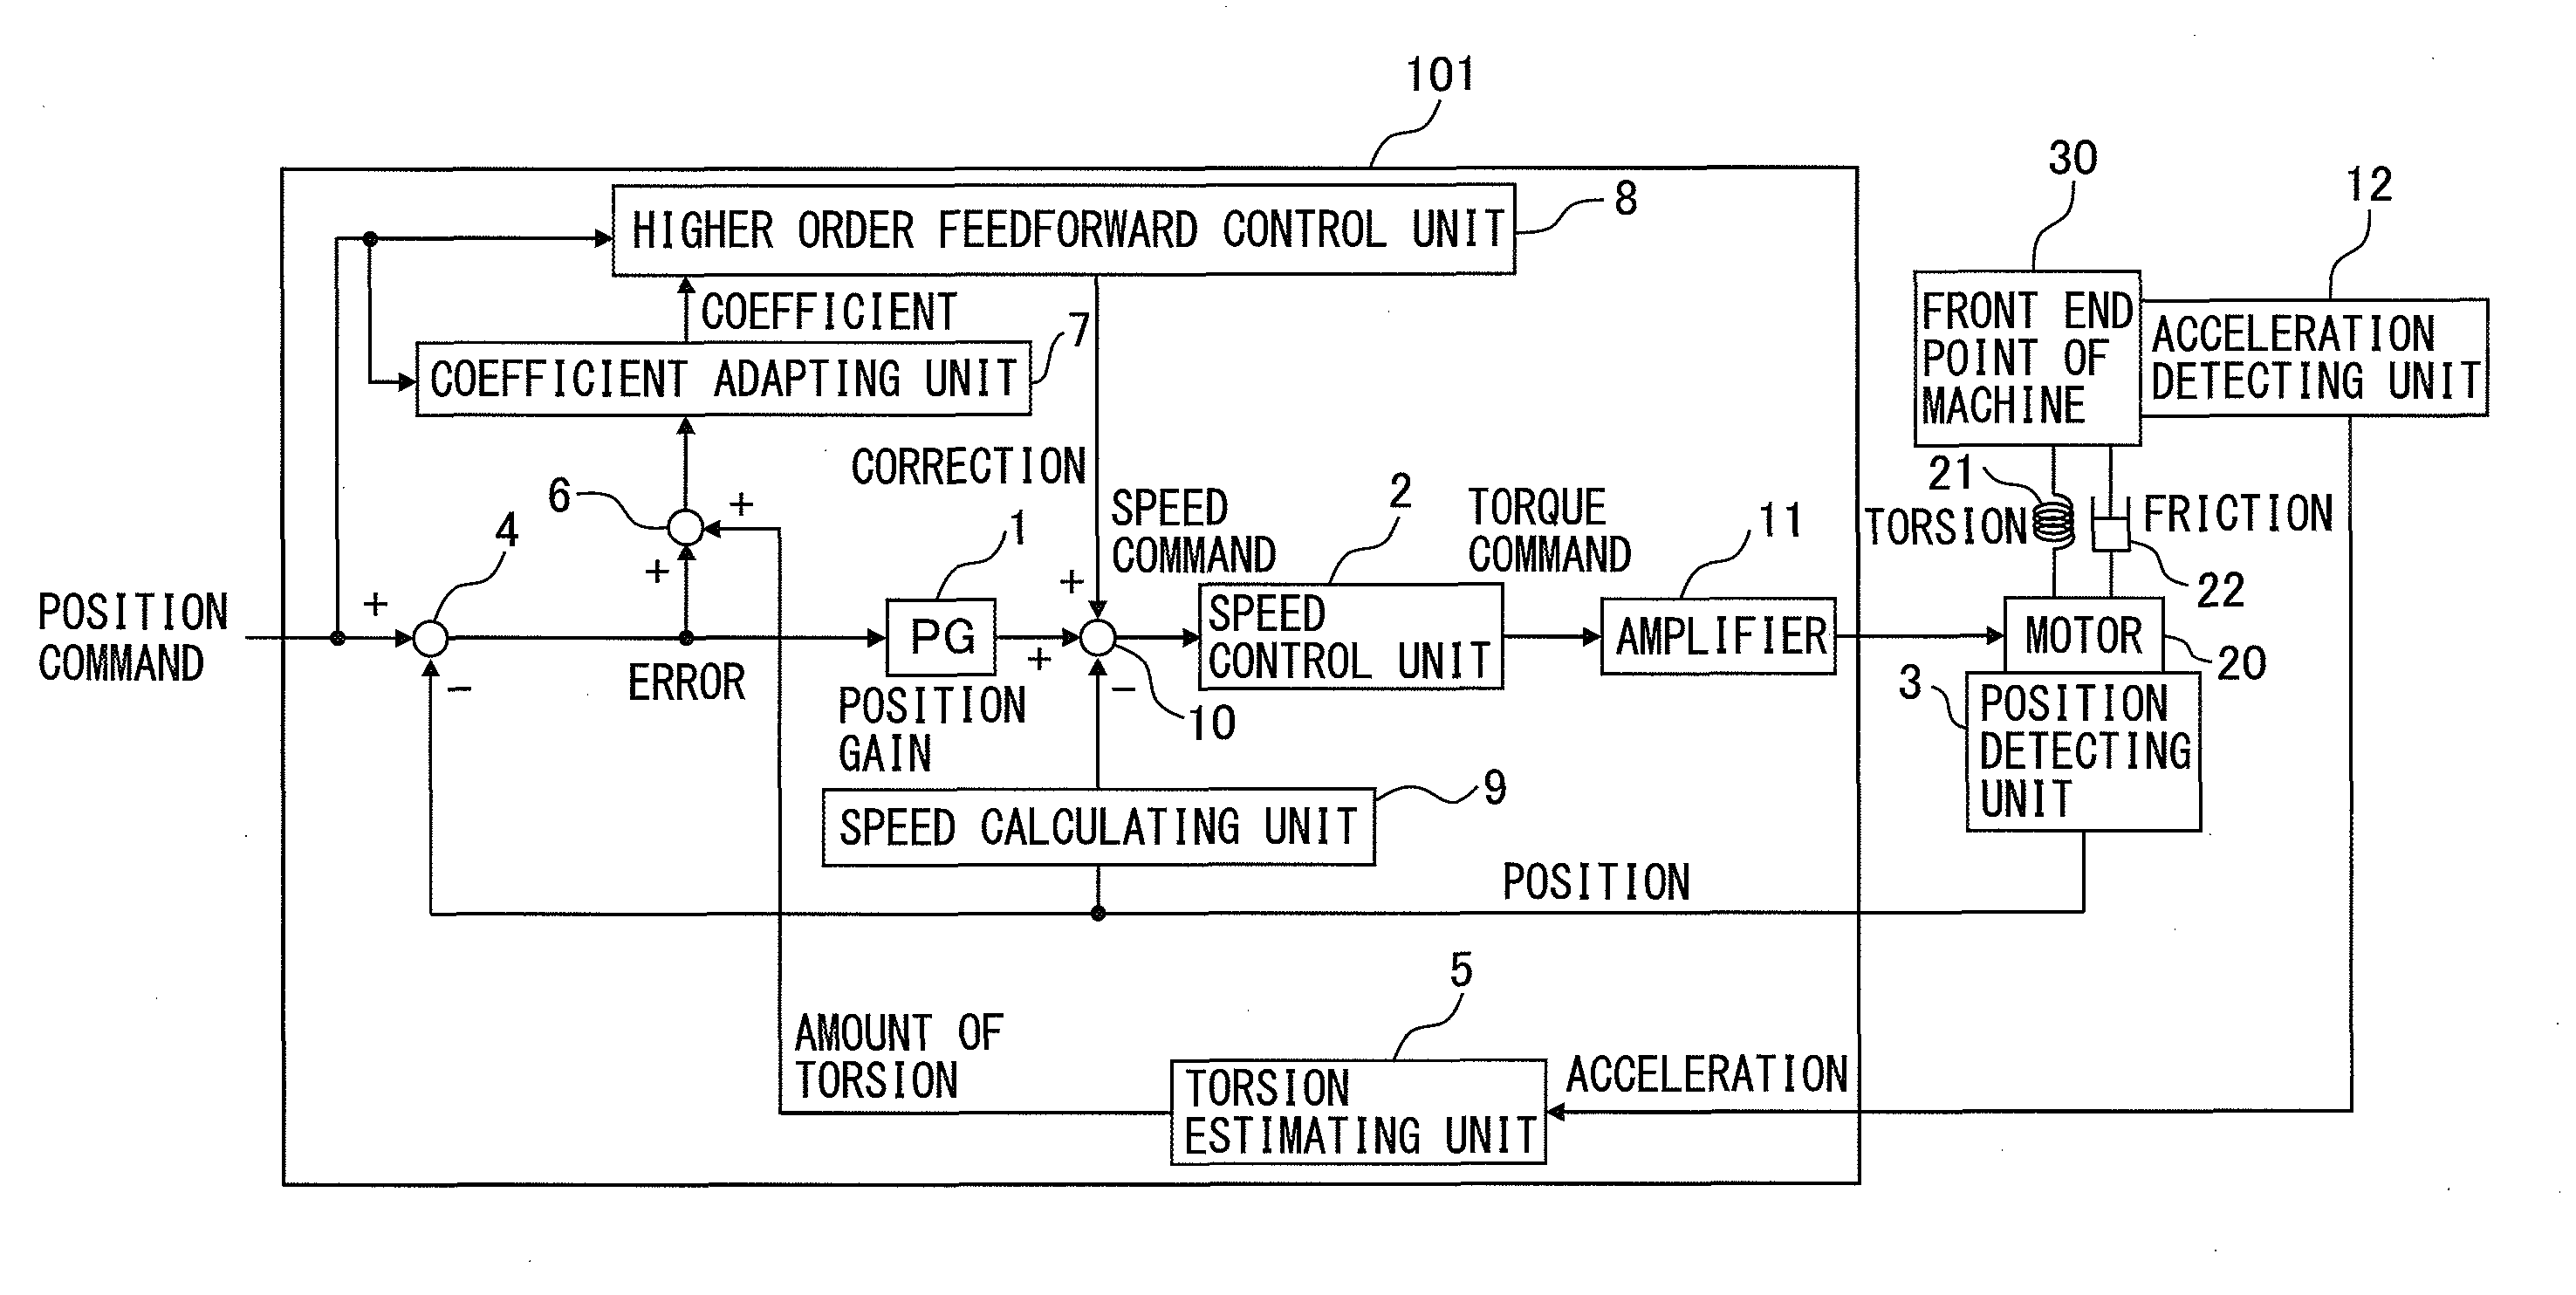 Servo control device reducing deflection of front end point of machine